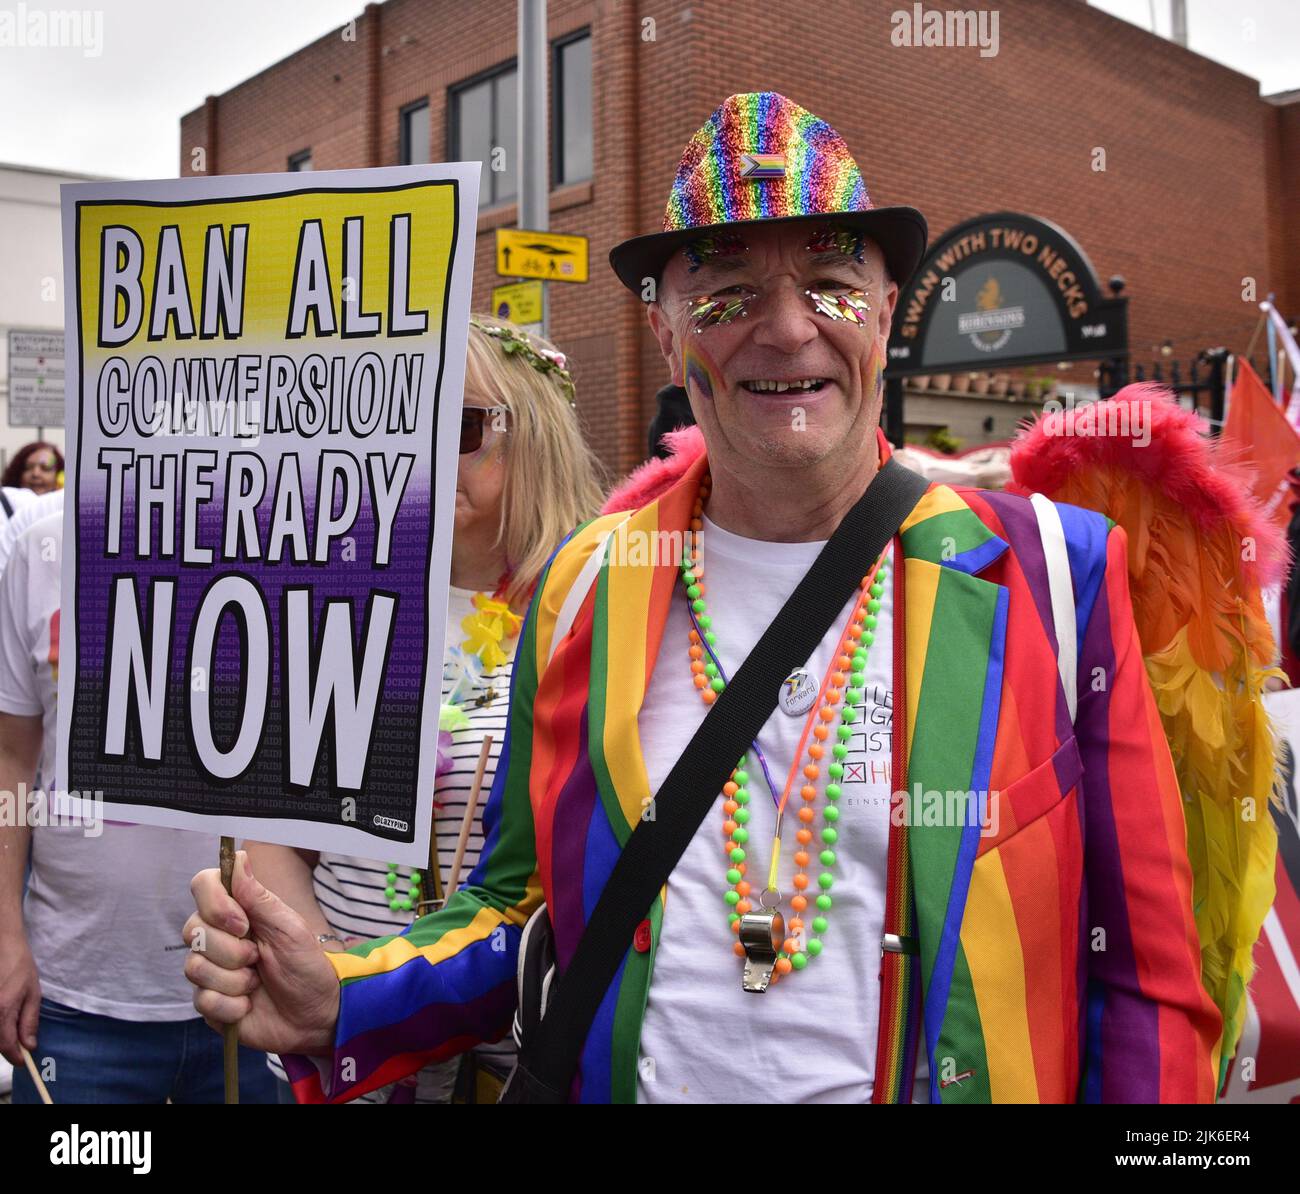 Stockport, UK, 31st July, 2022. Stockport LGBTQ+ Pride Parade in Stockport, Greater Manchester, England, United Kingdom, British Isles. Organisers say the parade is: 'Celebrating Stockport's LGBTQ+'. Community'. The parade marched from Bridgefield Street to Stockport's historic Market Place. Credit: Terry Waller/Alamy Live News Stock Photo